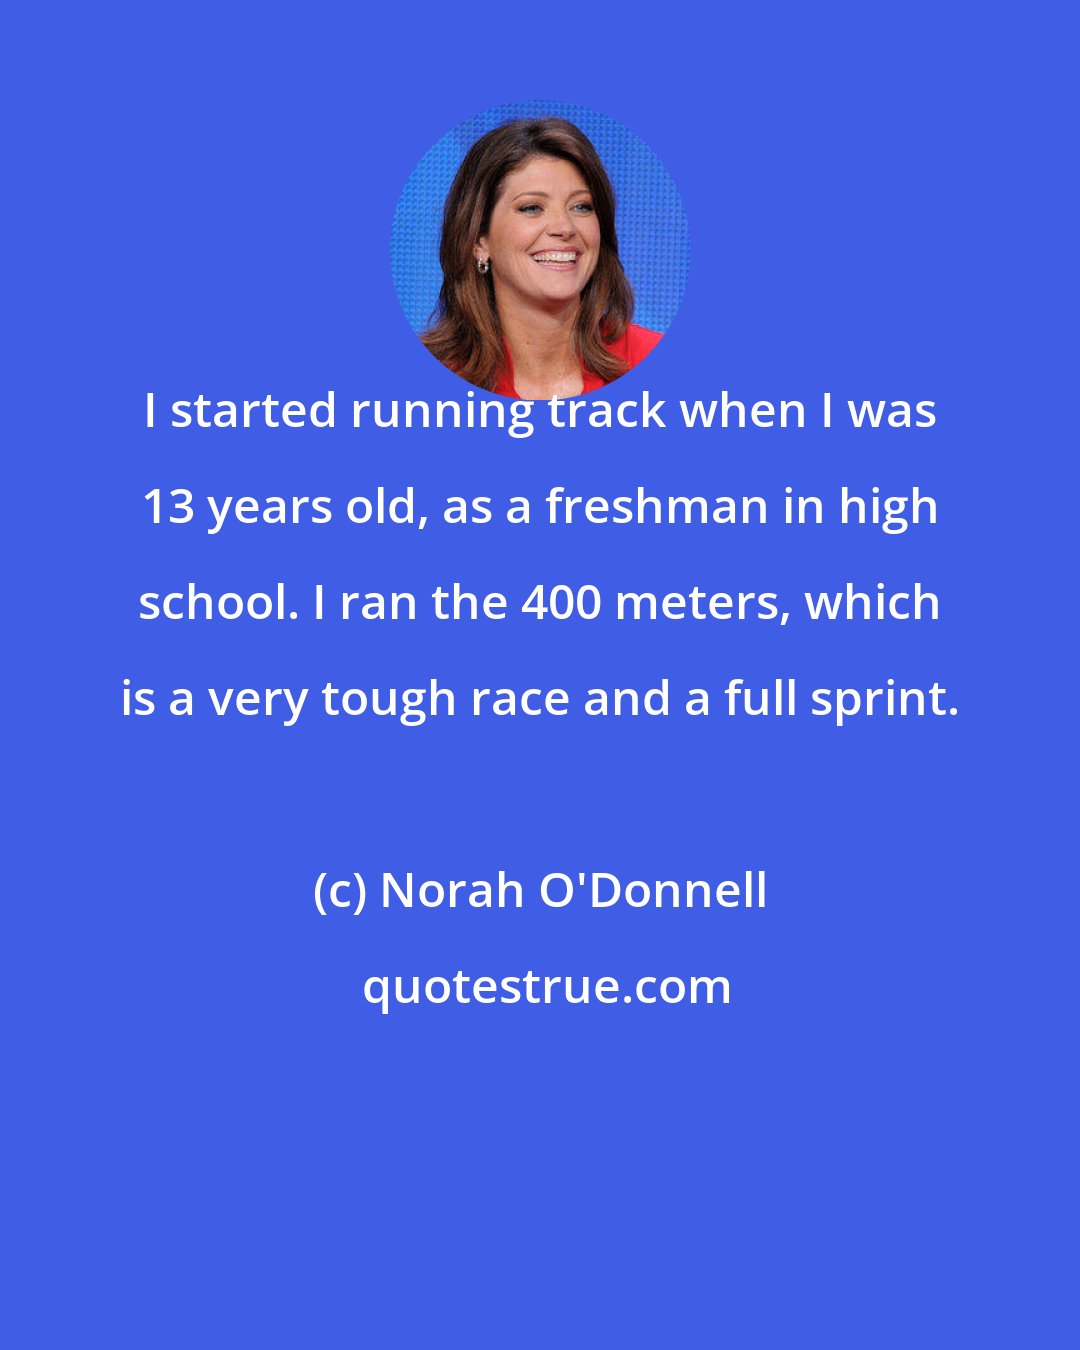 Norah O'Donnell: I started running track when I was 13 years old, as a freshman in high school. I ran the 400 meters, which is a very tough race and a full sprint.